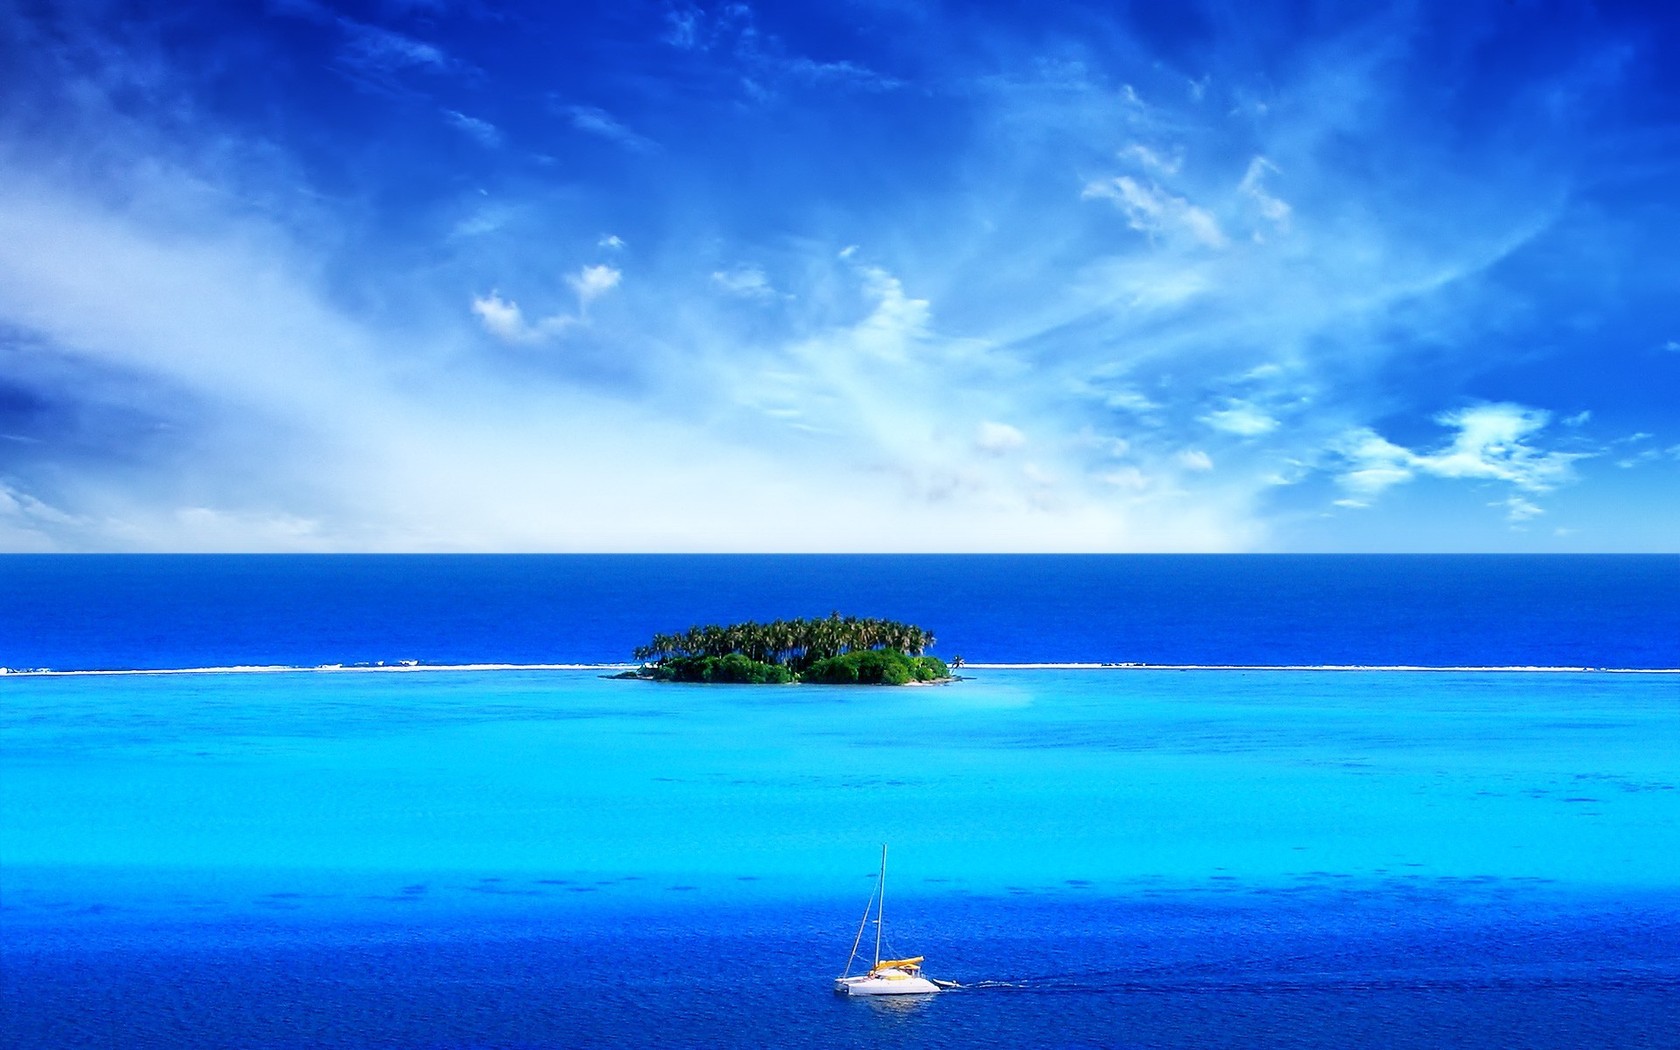 Download Sailing around the tropical island wallpaper